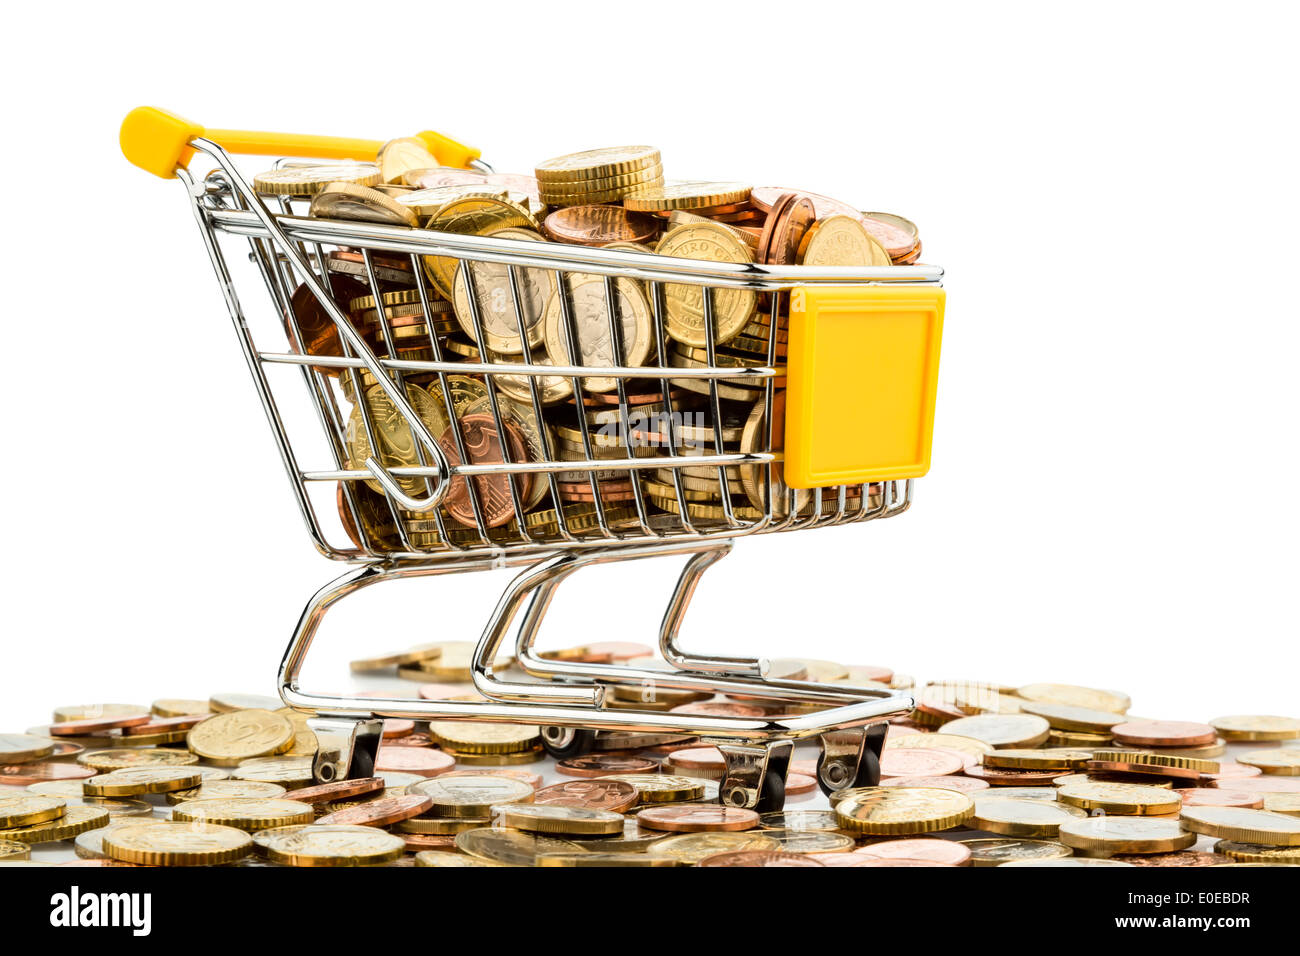 A shopping cart is well filled with eurocoins, symbolic photo for buying power and consumption, Ein Einkaufswagen ist mit Euromu Stock Photo